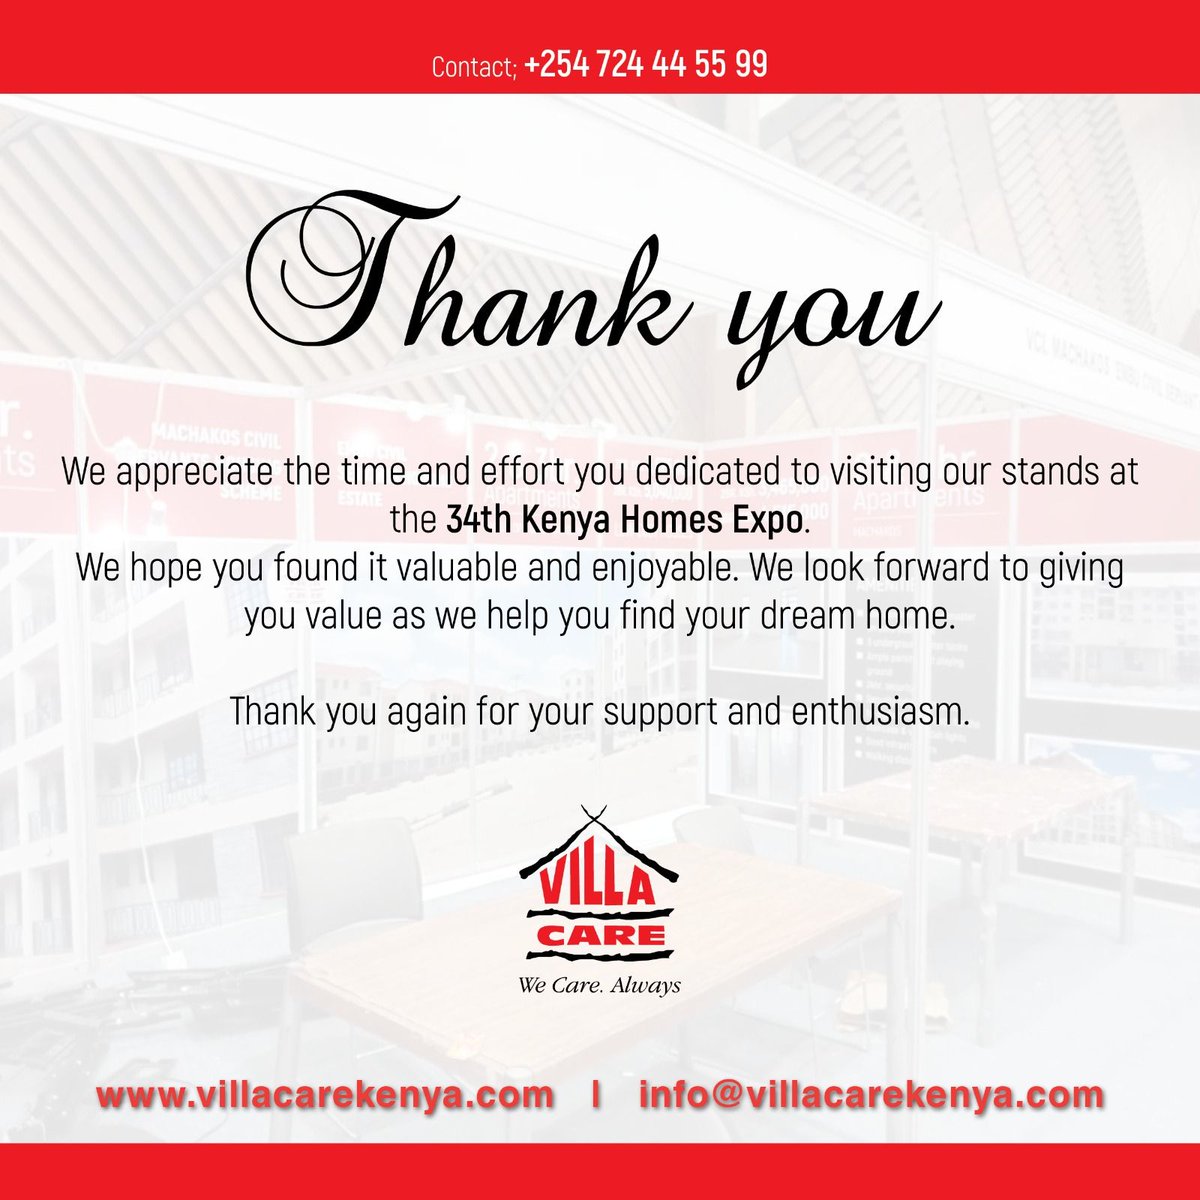 Thank you once more! The #34thKenyaHomesExpo was a success because of your support. Be on the lookout for the #35thKenyaHomesExpo next year in April!

#thankyou #customersatisfaction #weappreciateyou #uhurukenyatta